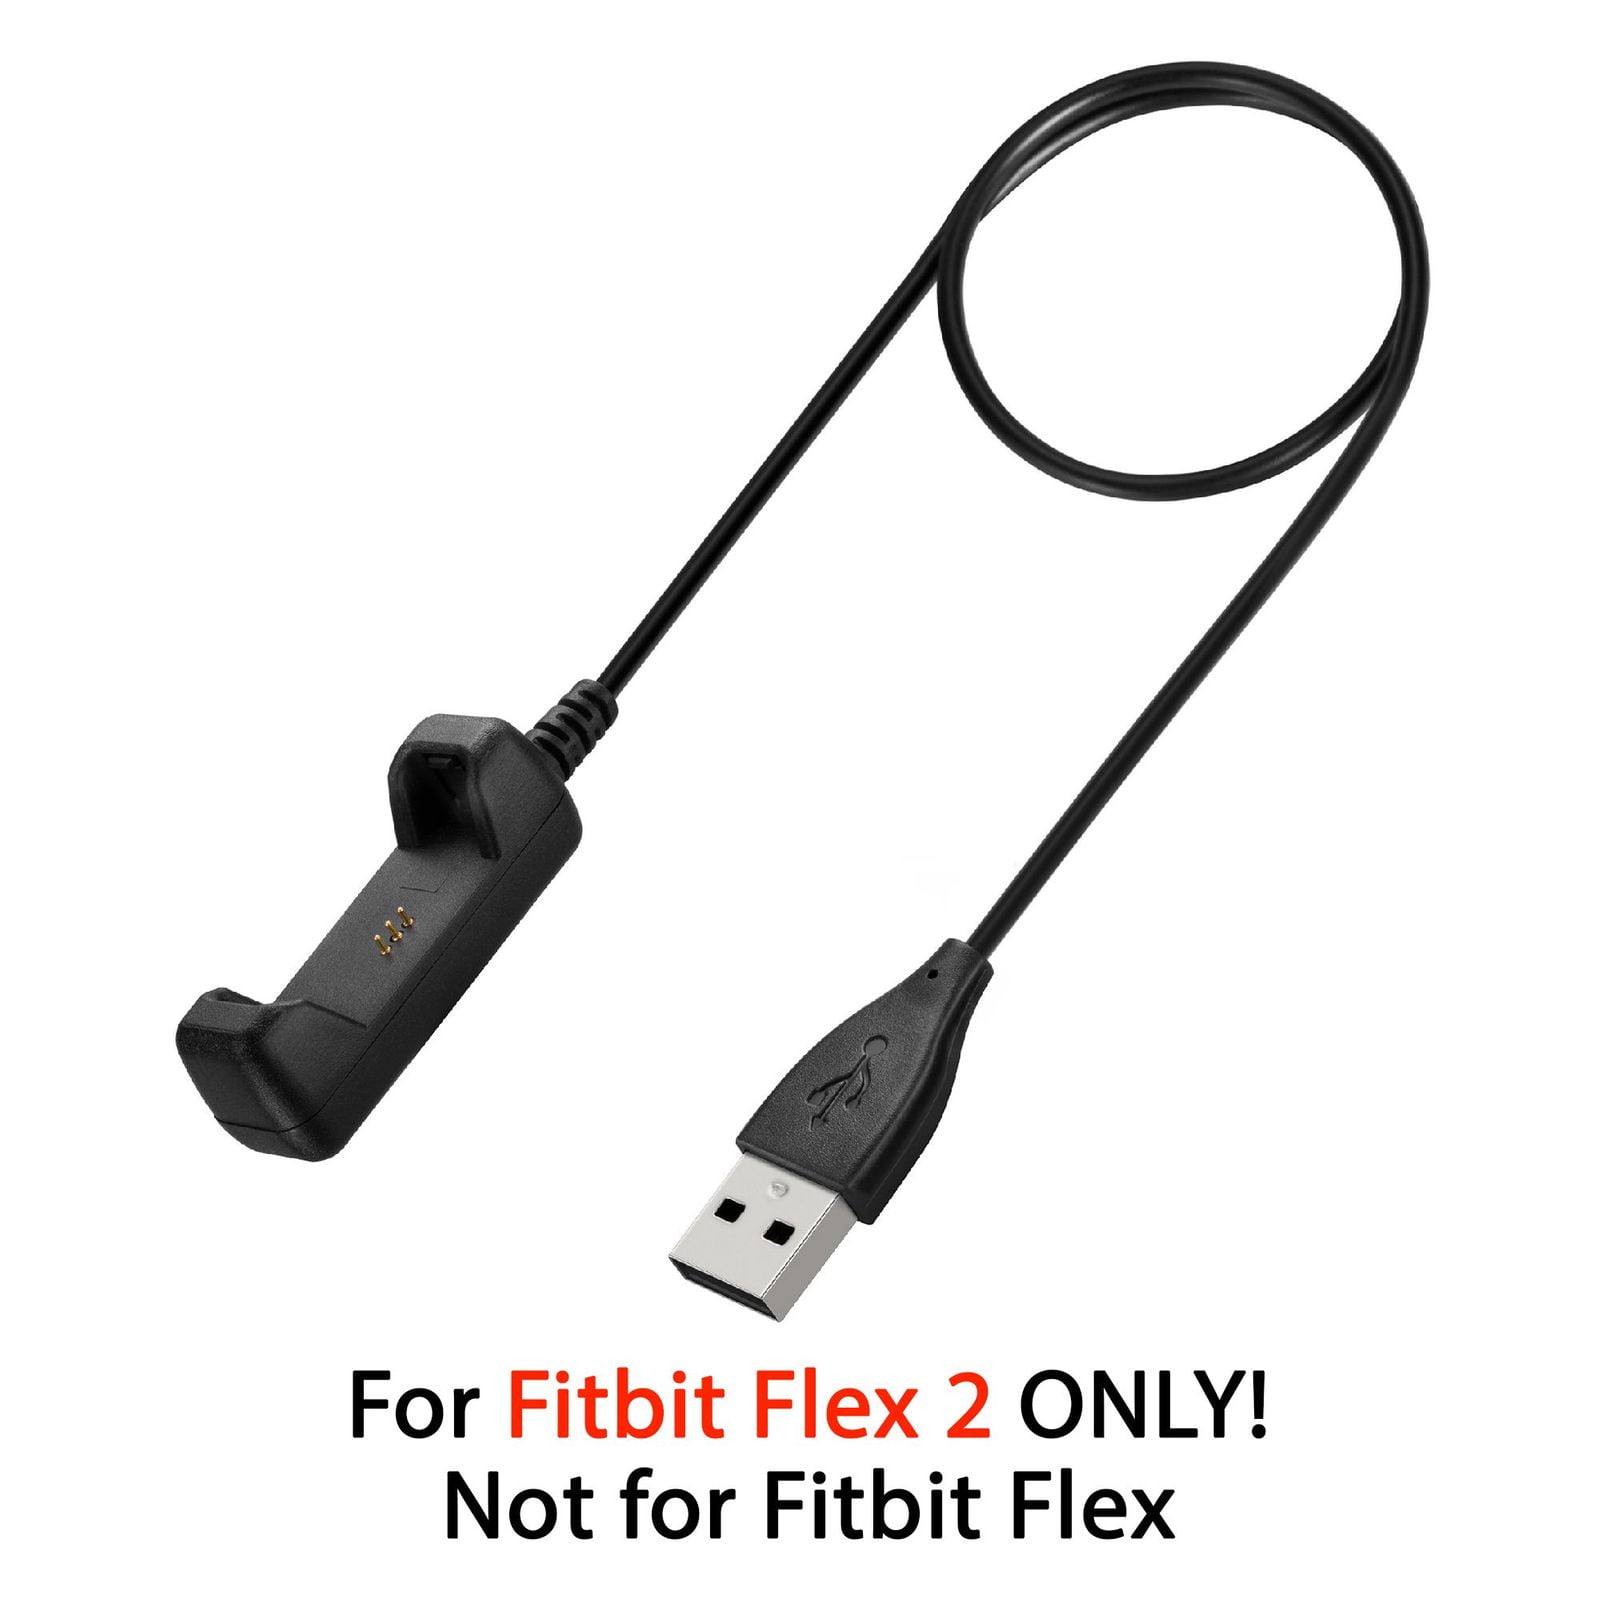 Fitbit Charge Wireless USB Sync Dongle & Charging Cable 